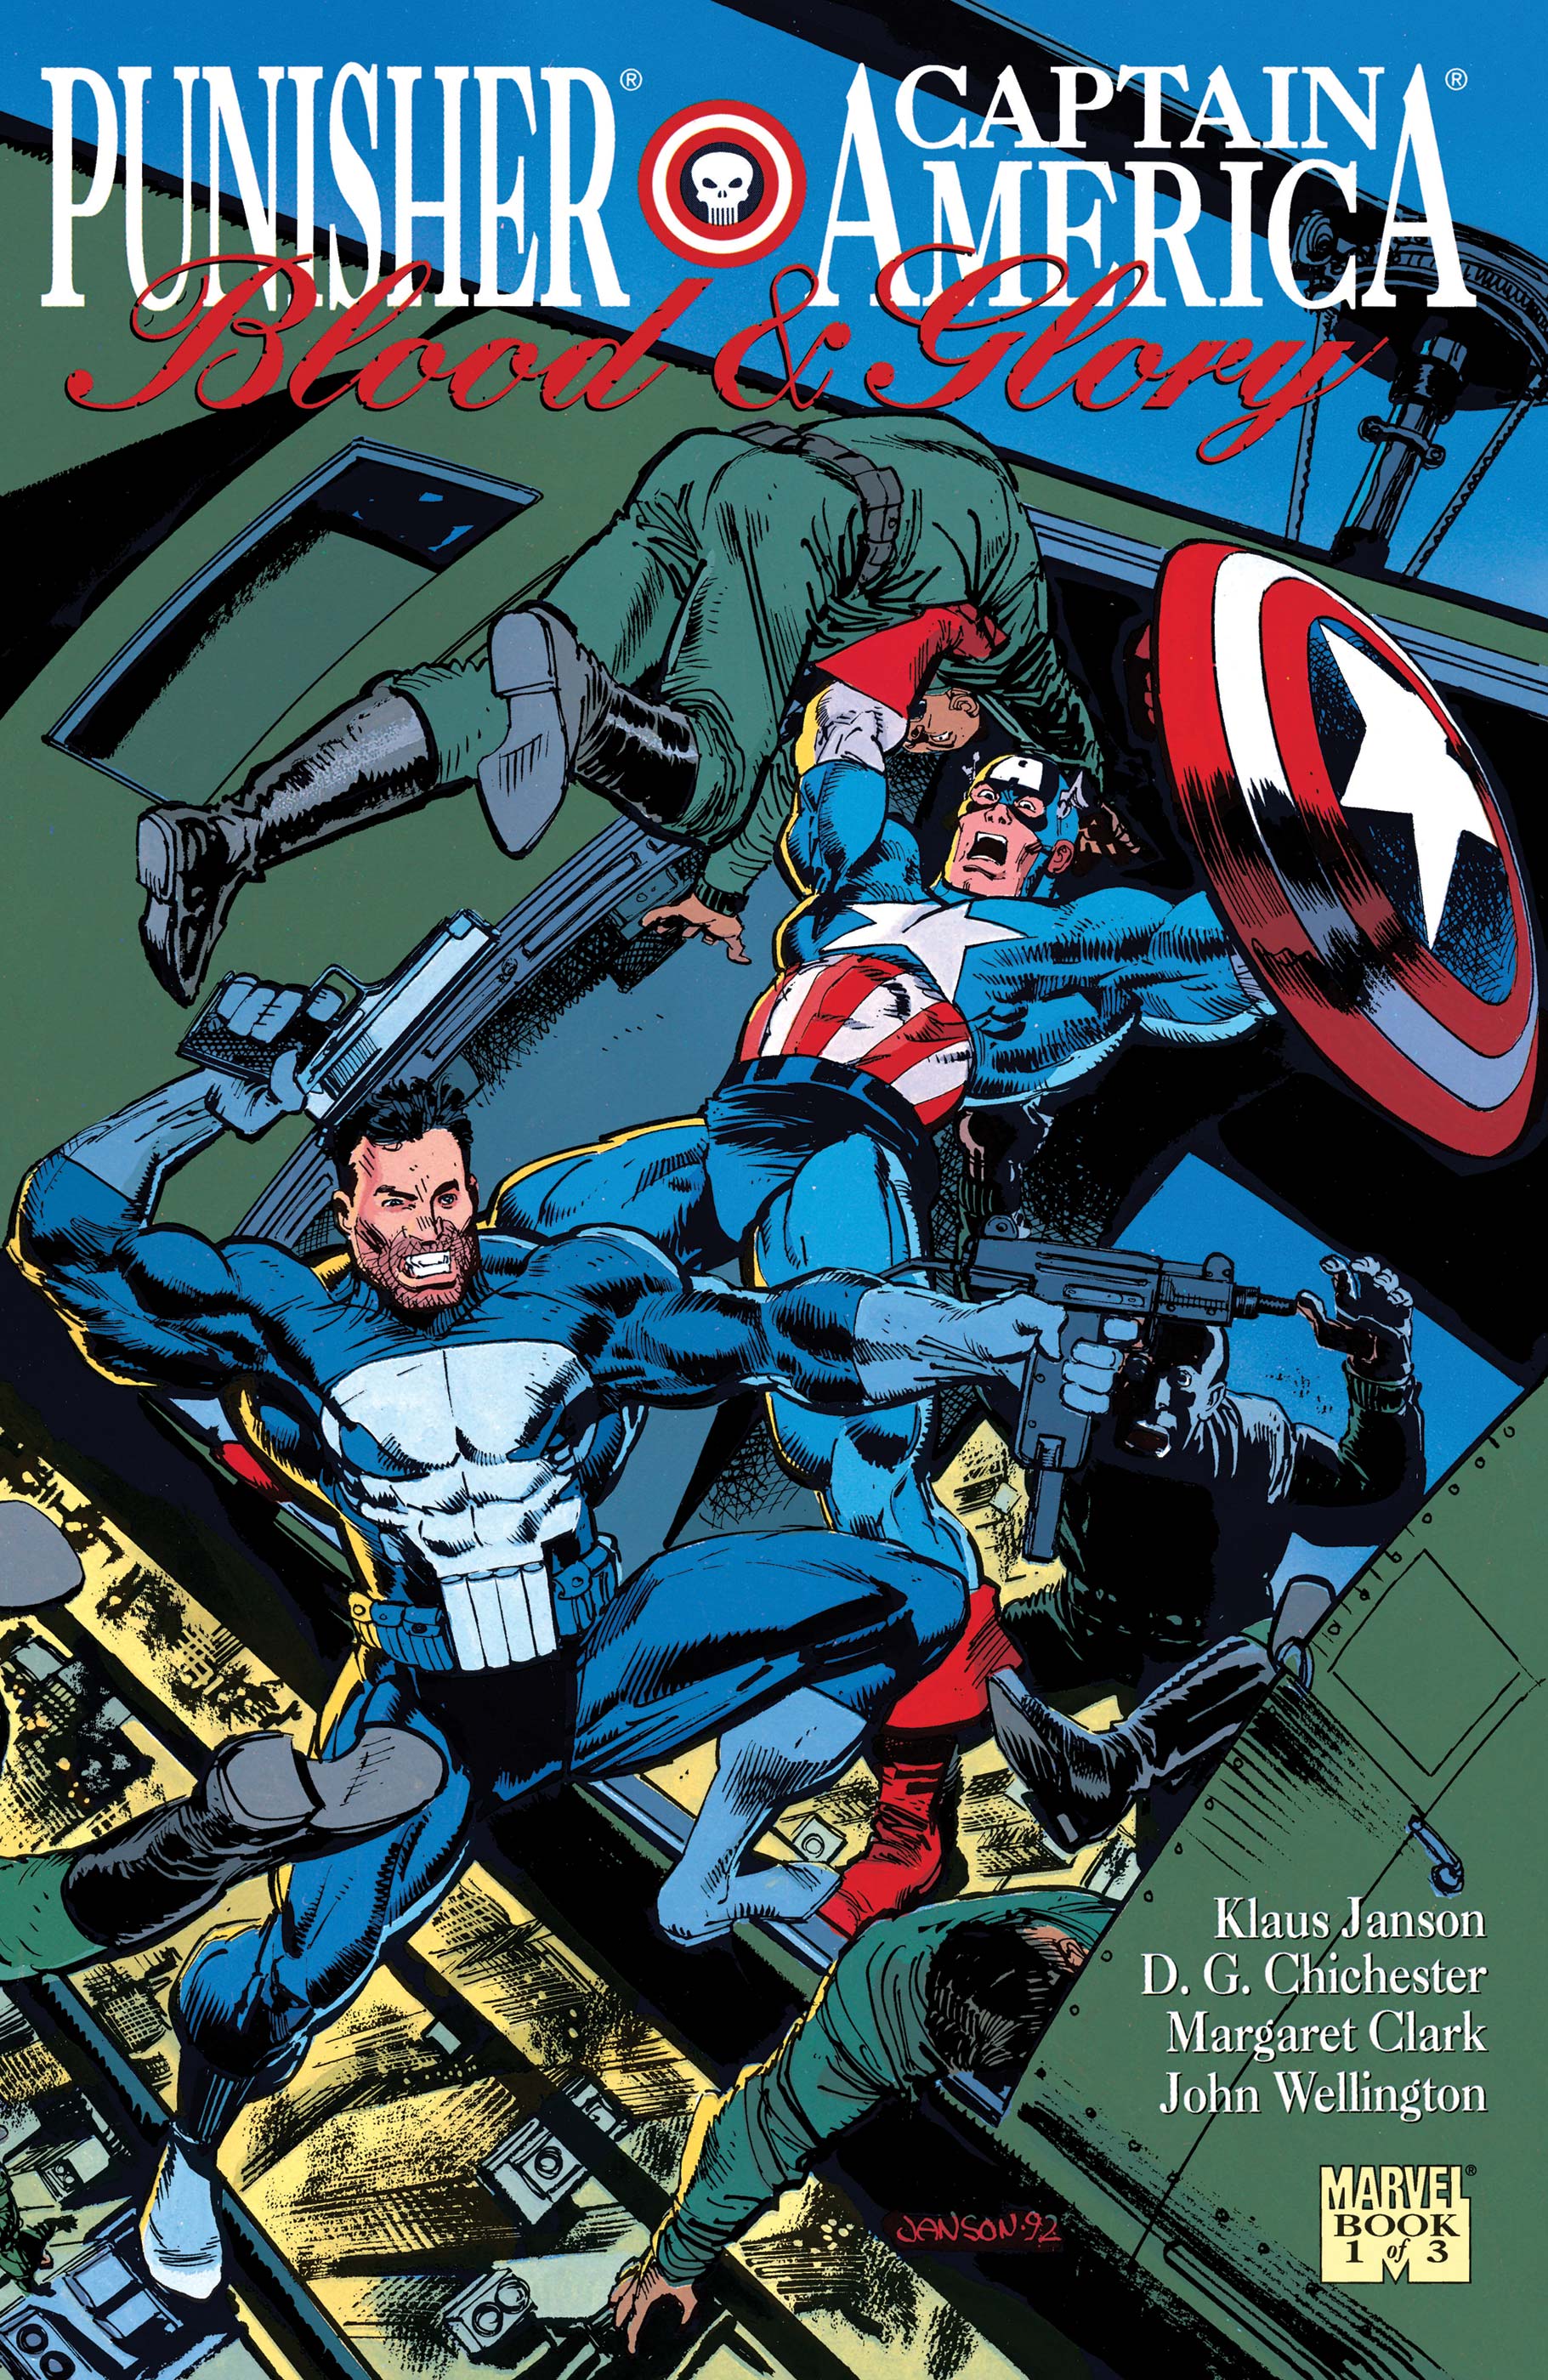 Punisher/Captain America: Blood and Glory (1992) #1